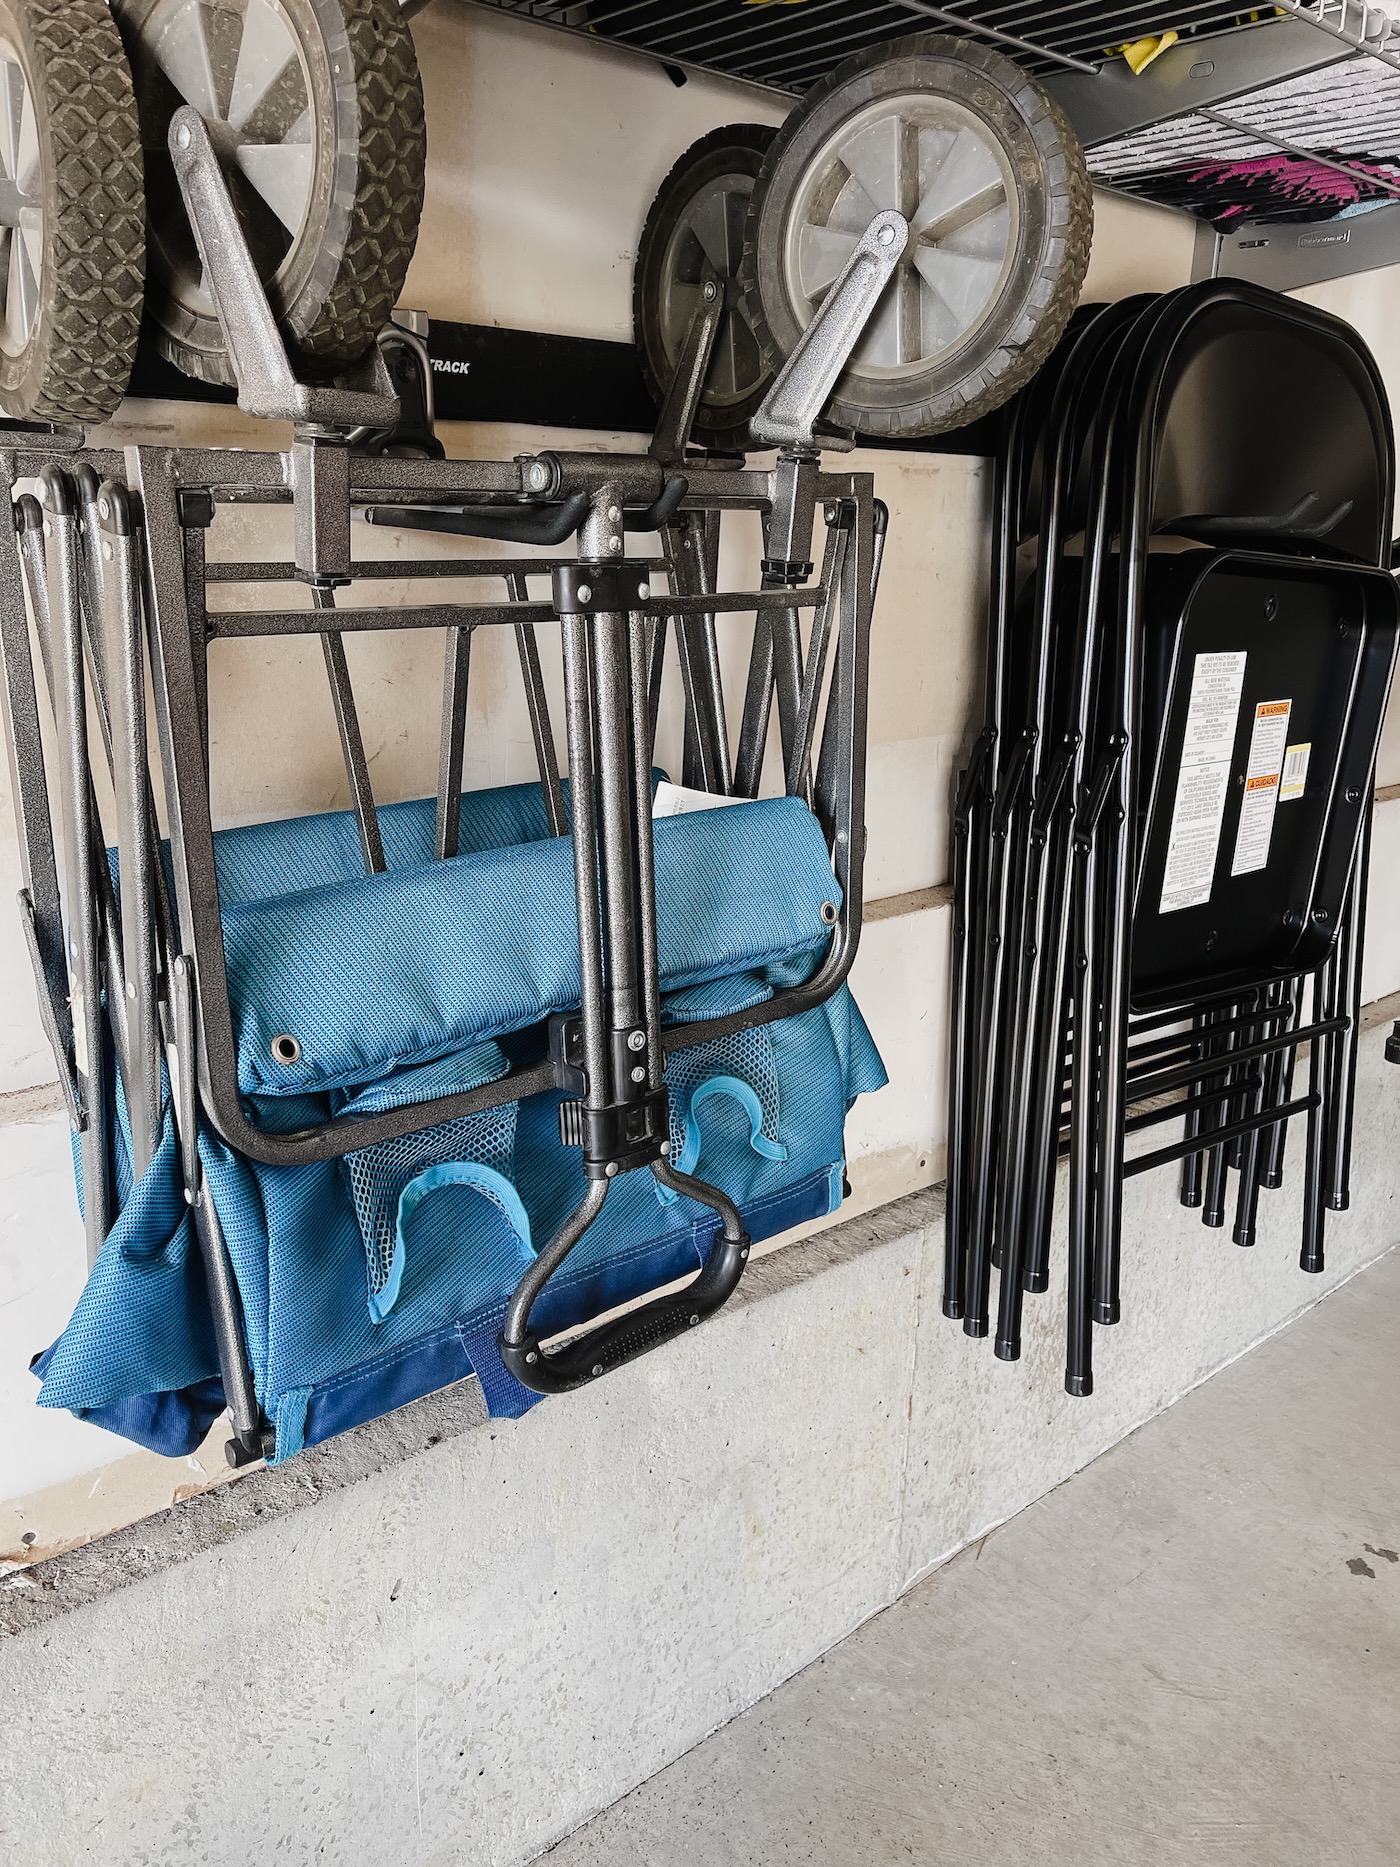 Our Rubbermaid Fast Track Garage Storage - Reveal! - Design Improvised